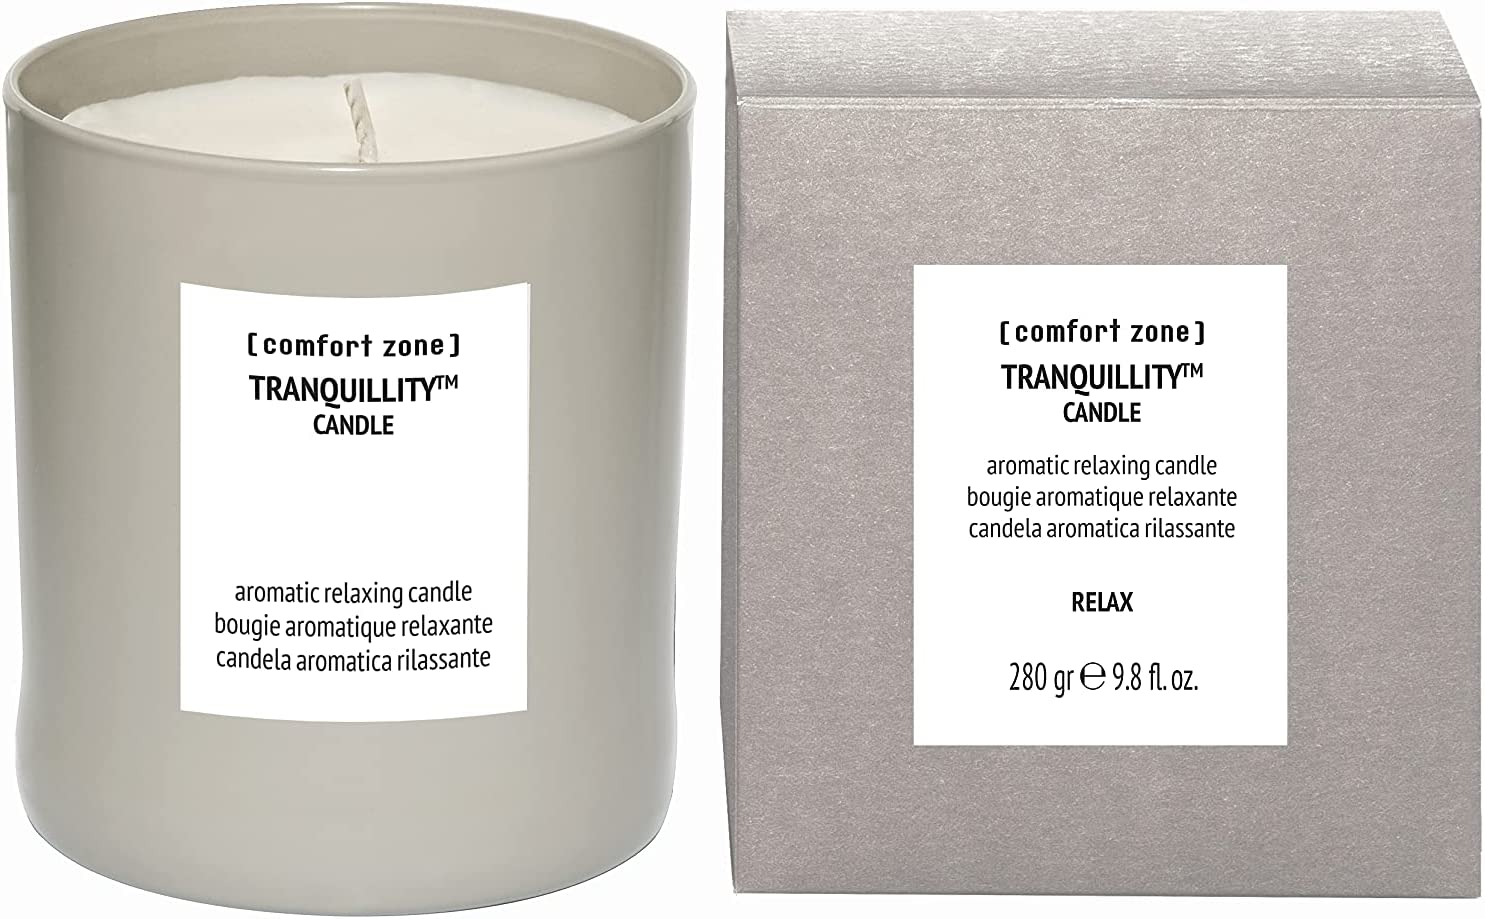 TRANQUILLITY CANDLE candela aromatica rilassante 280 g